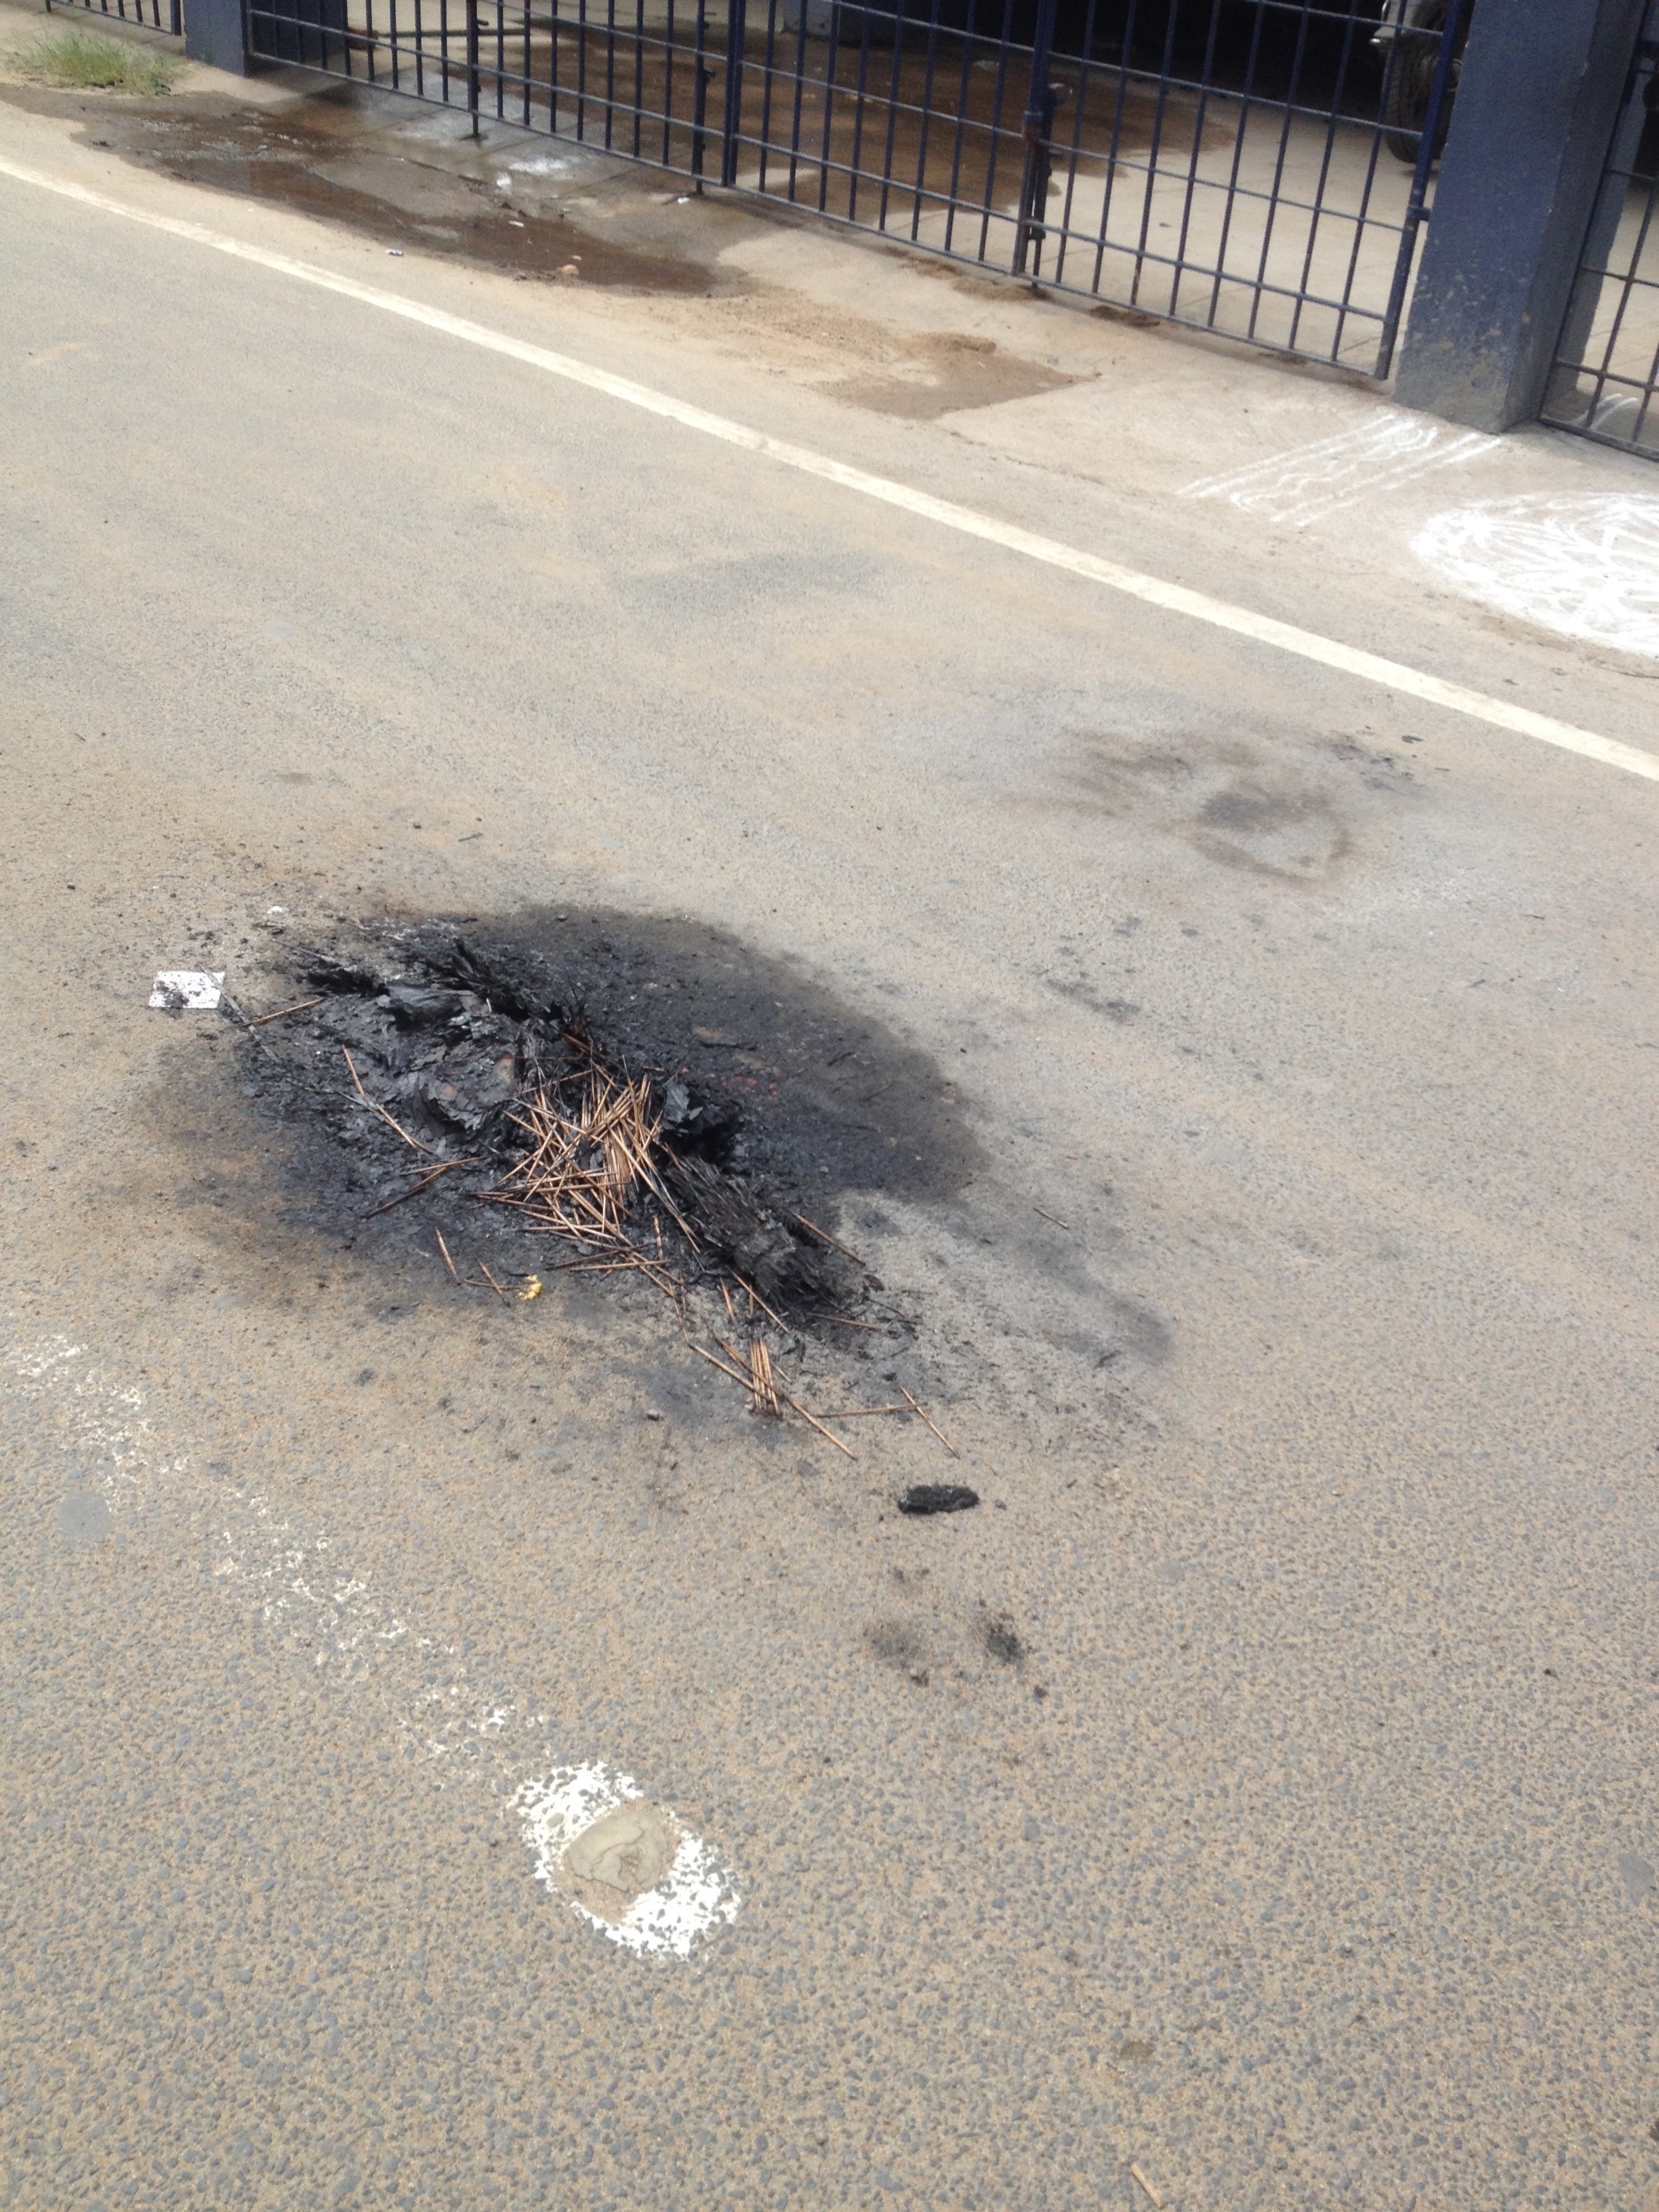 Smack in the middle of the road - a perfect spot of Bhogi burns